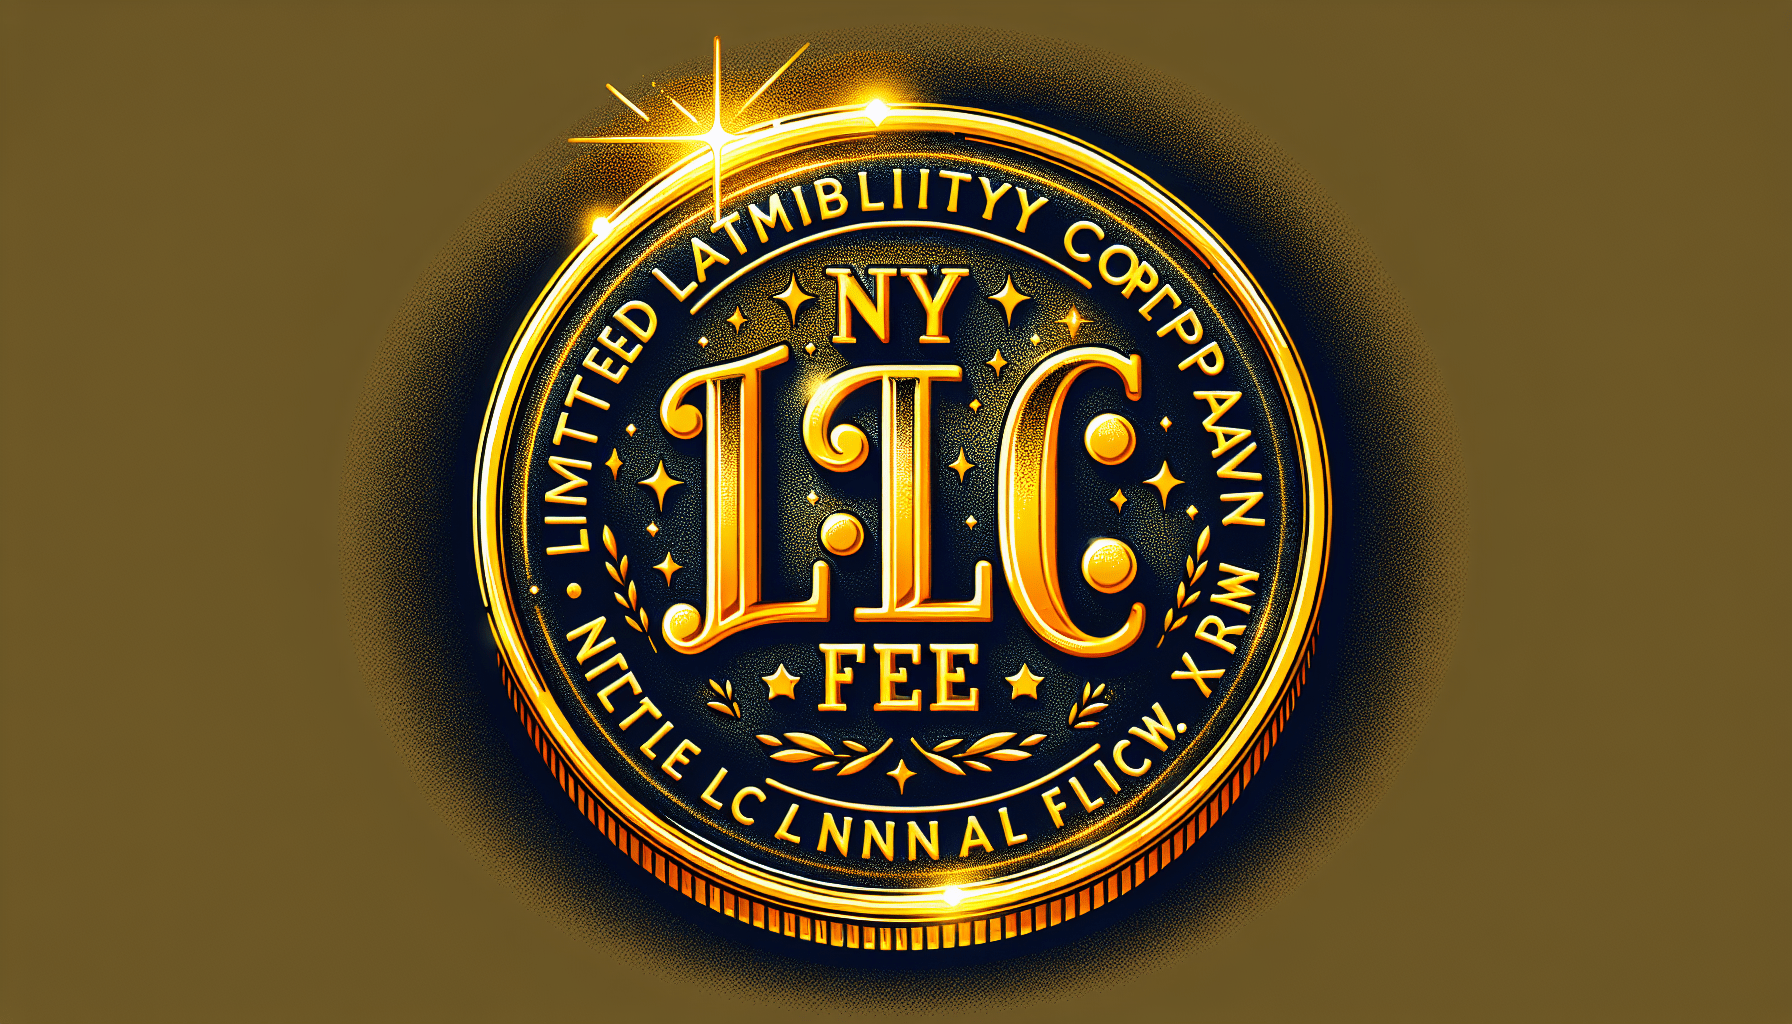 Do You Have To Pay For An LLC Every Year In NY?